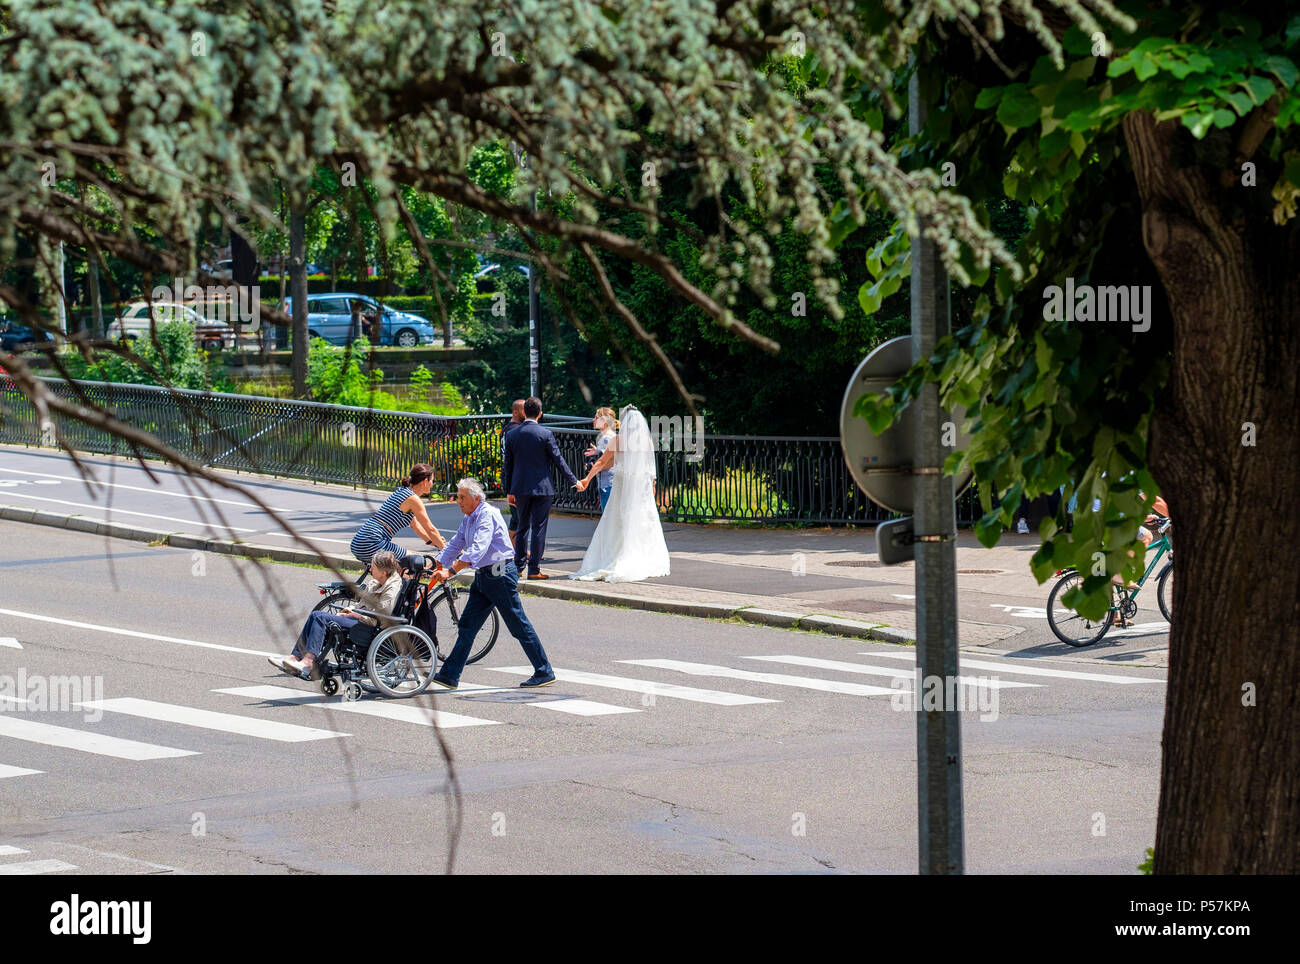 Strasbourg, mature man pushing elderly woman in wheelchair, woman cyclist, pedestrian crossing, new-weds, photographer, street, Alsace, Europe Stock Photo